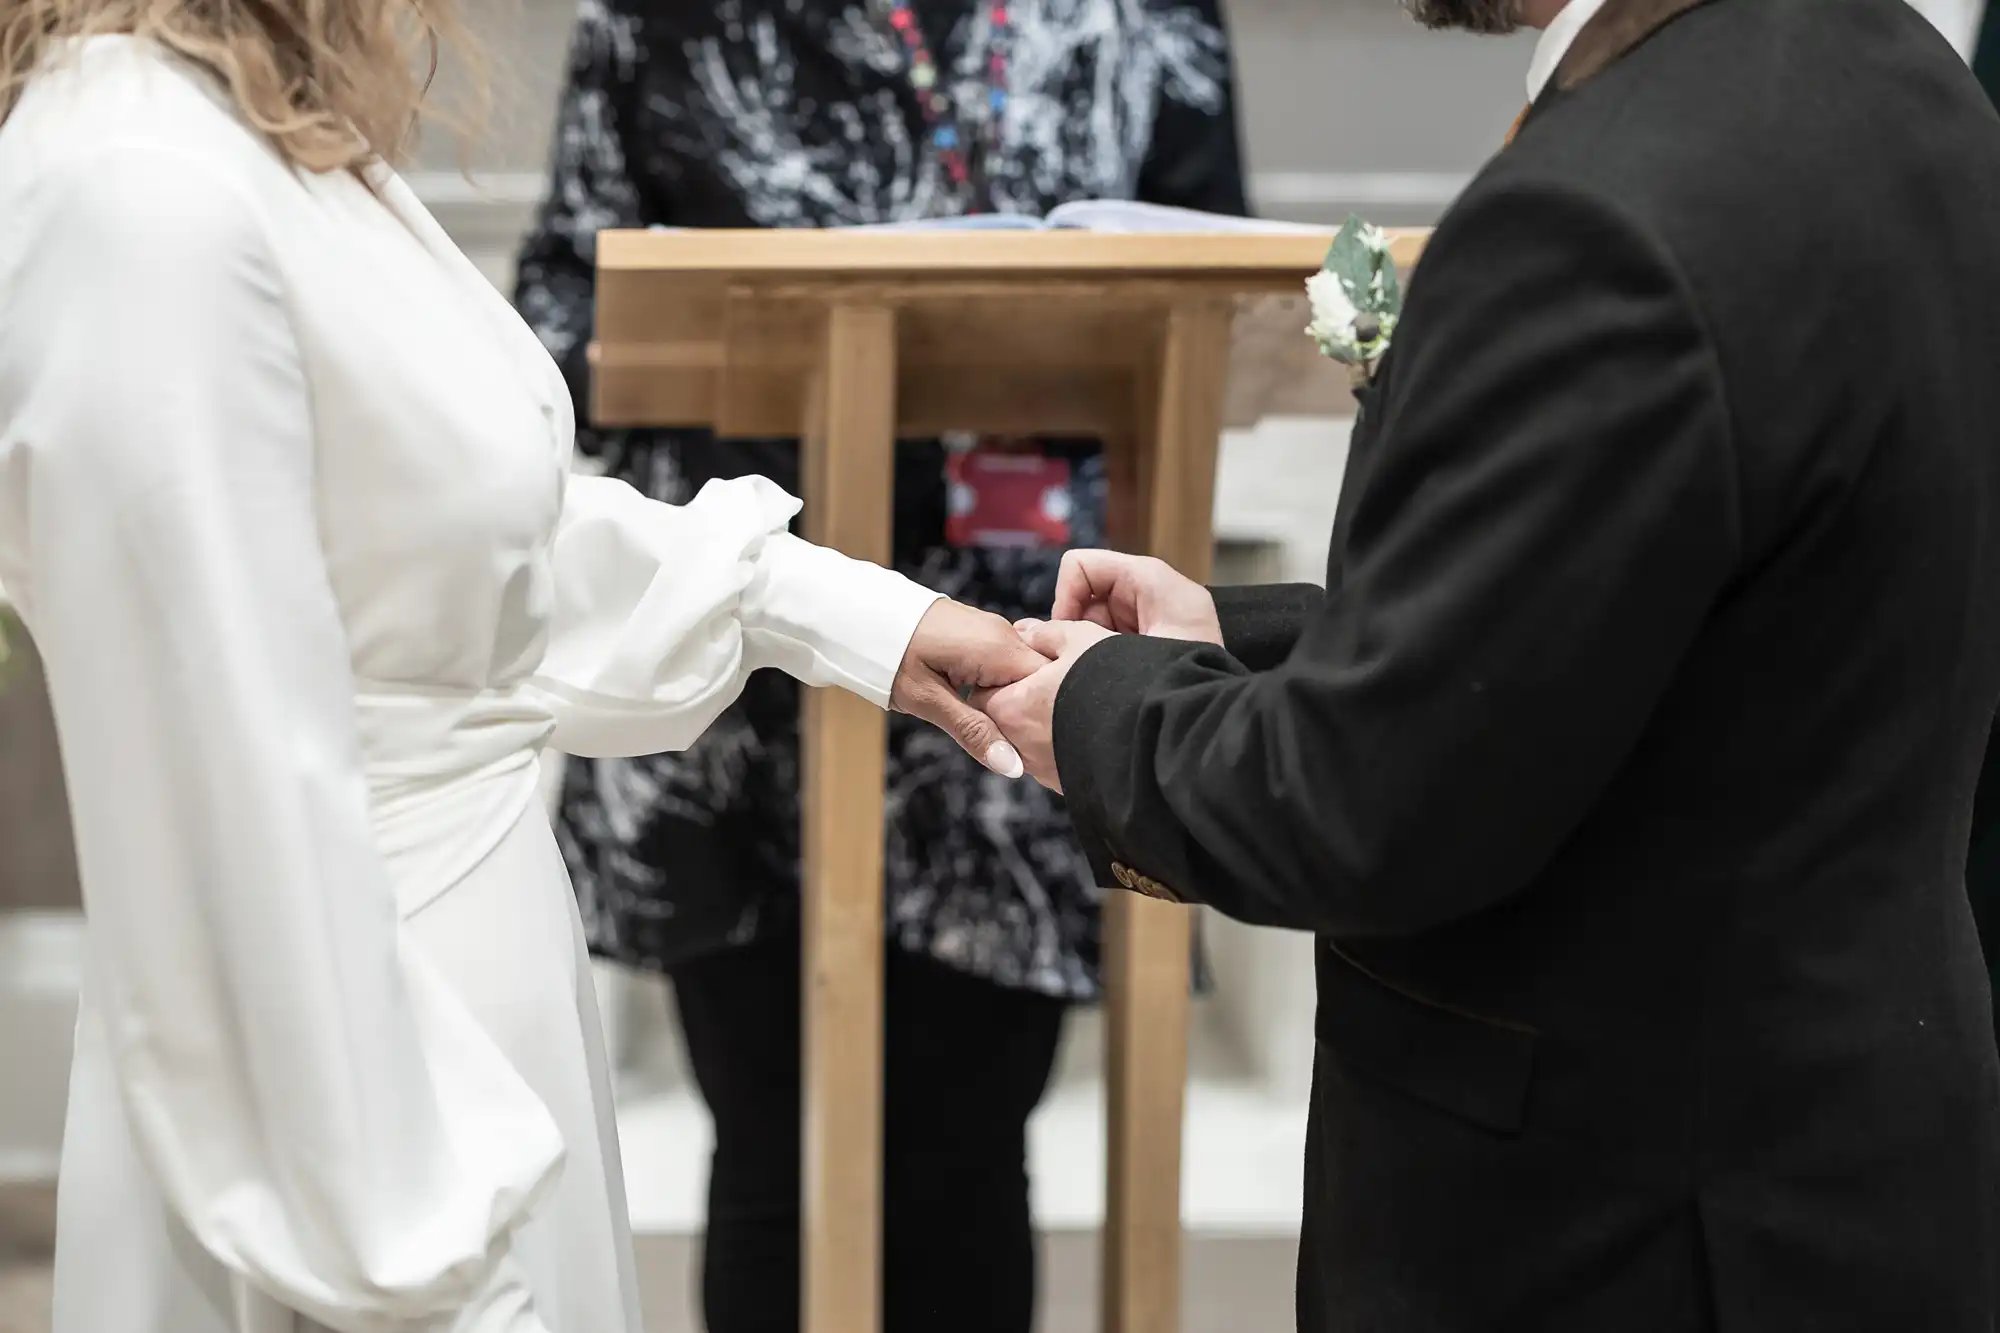 A man and woman stand facing each other and holding hands in front of a lectern, with an individual standing behind it.